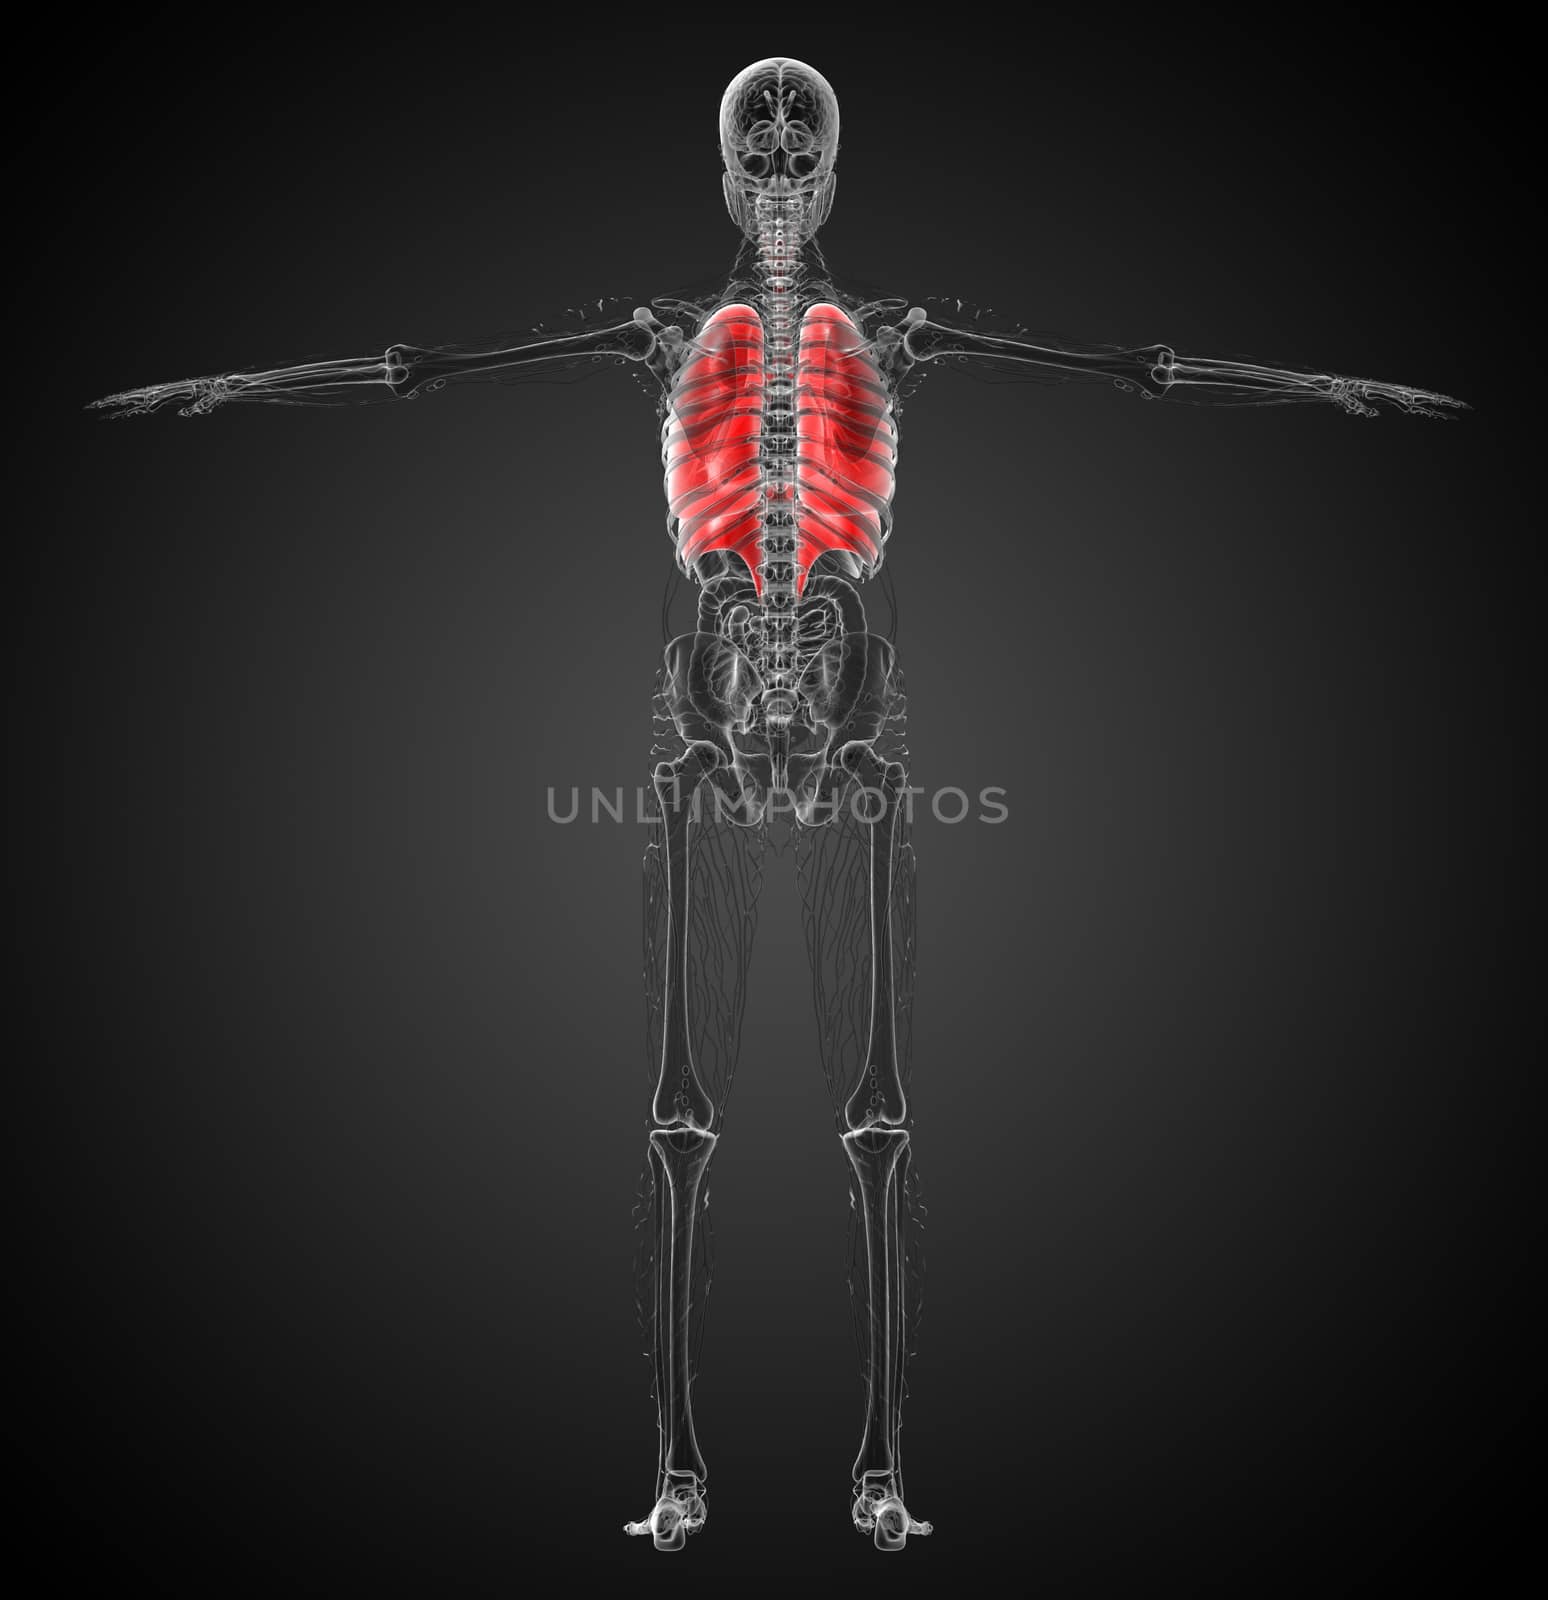 3d render medical illustration of the human respiratory system - back view